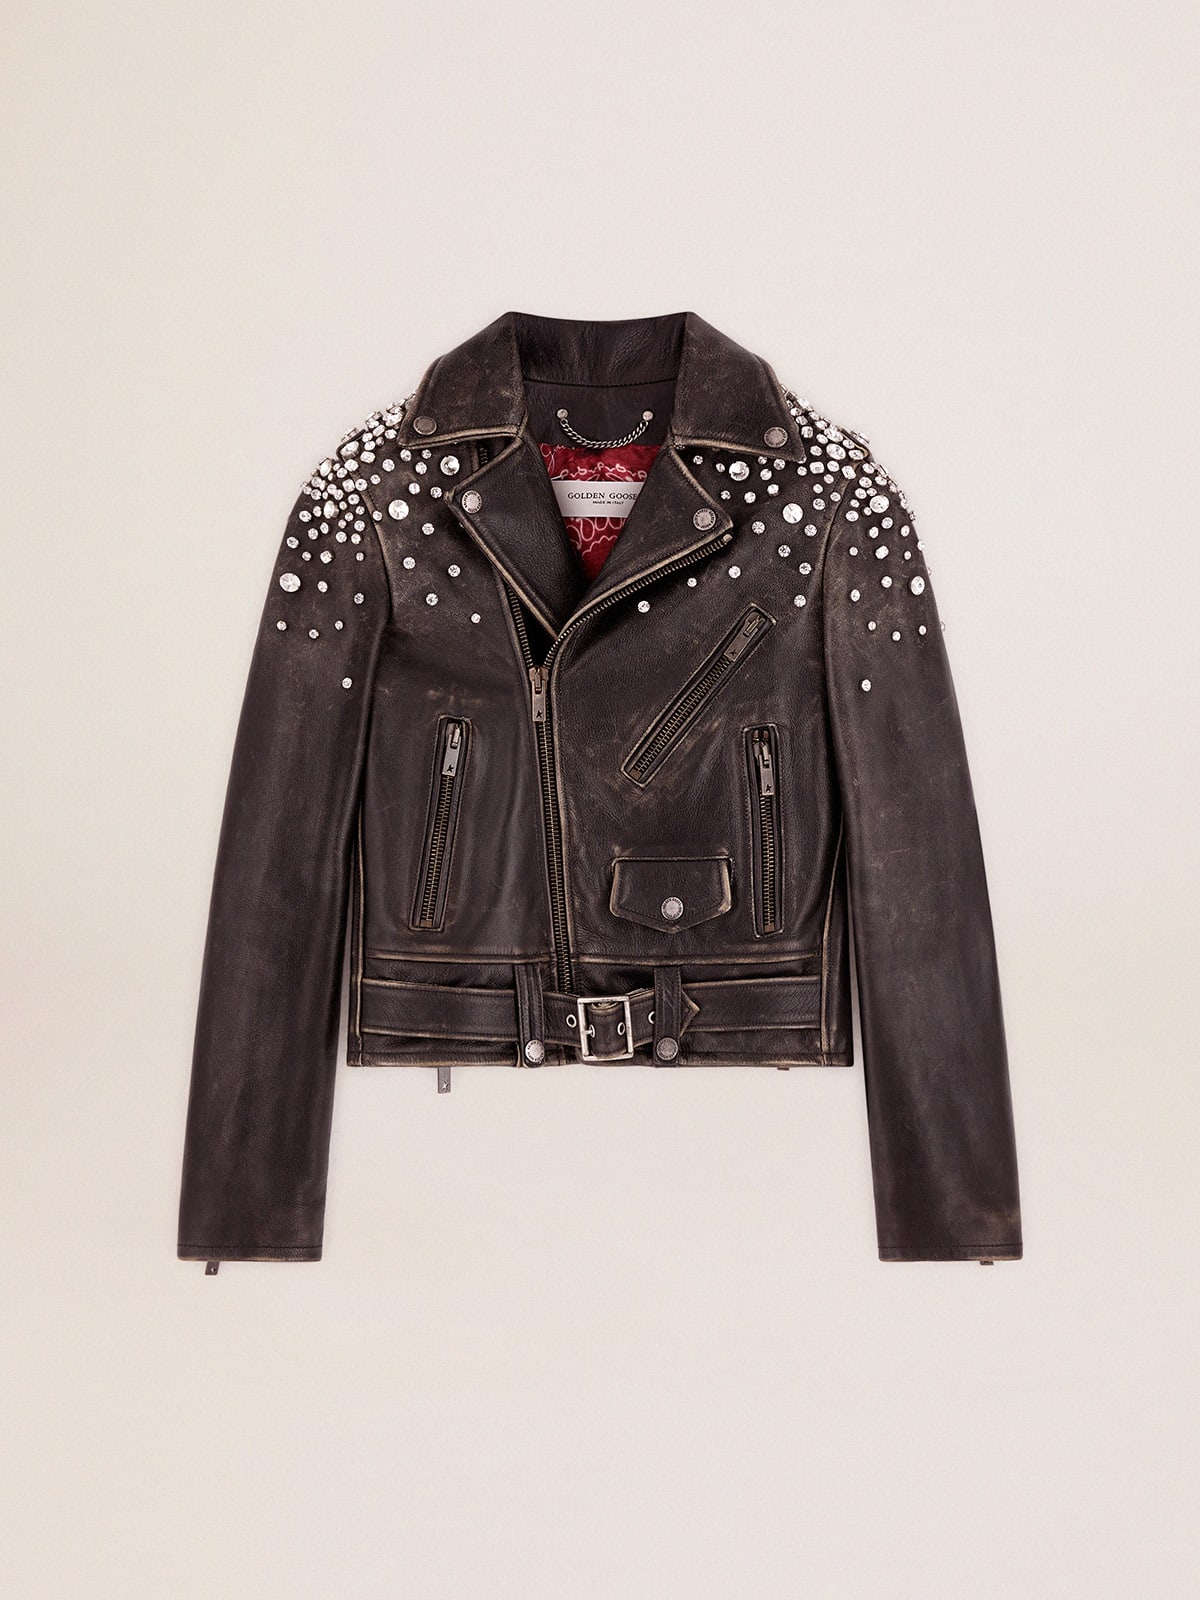 Biker jacket in distressed leather with cabochon crystals